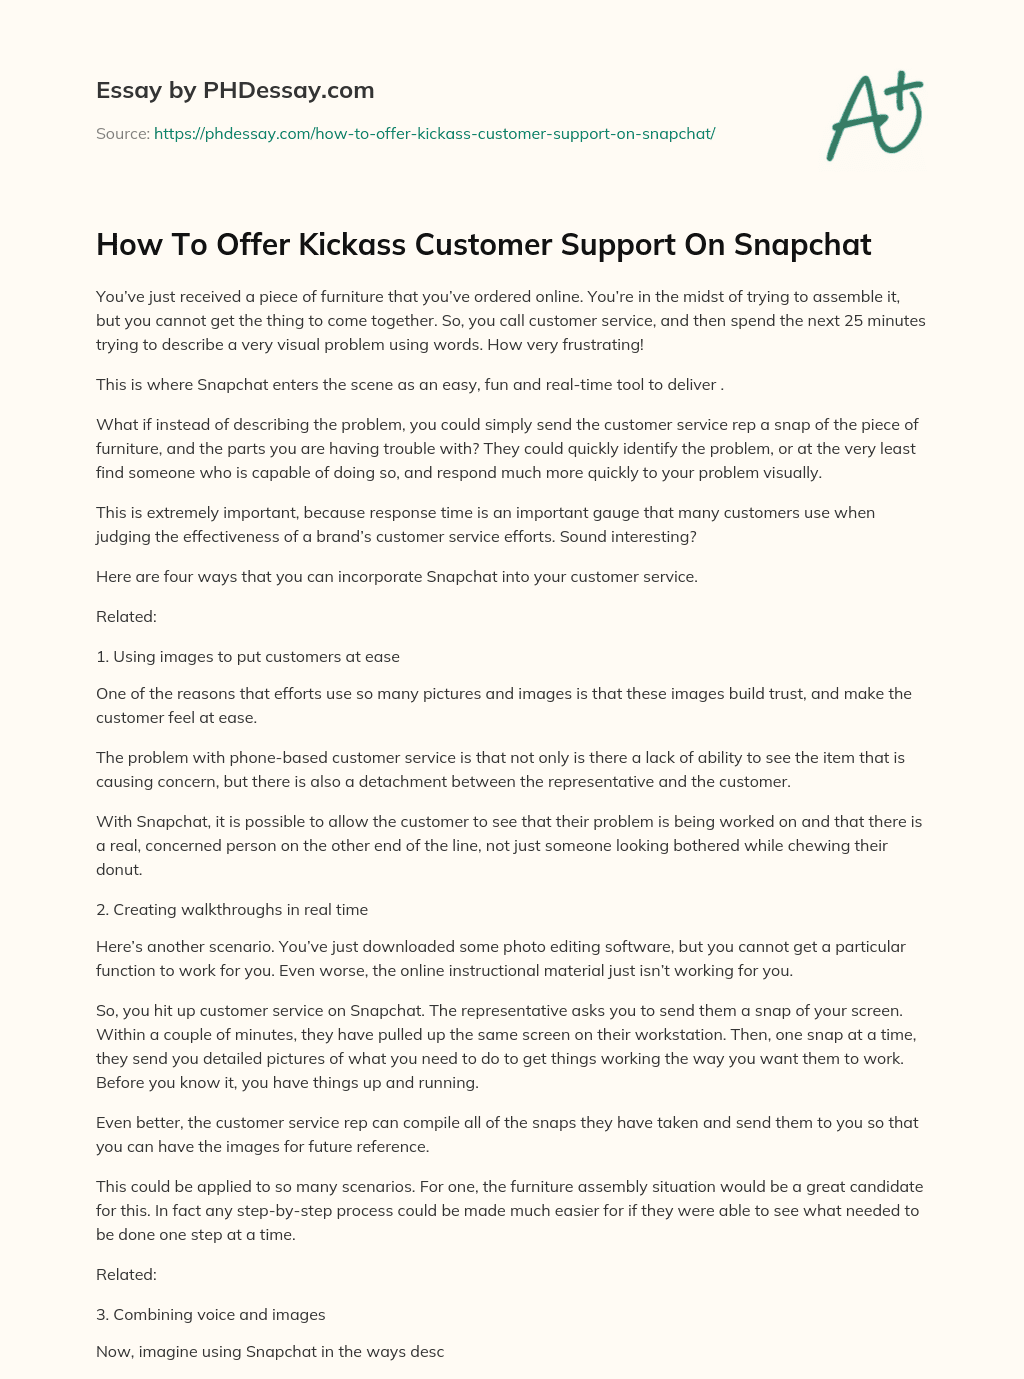 How To Offer Kickass Customer Support On Snapchat essay